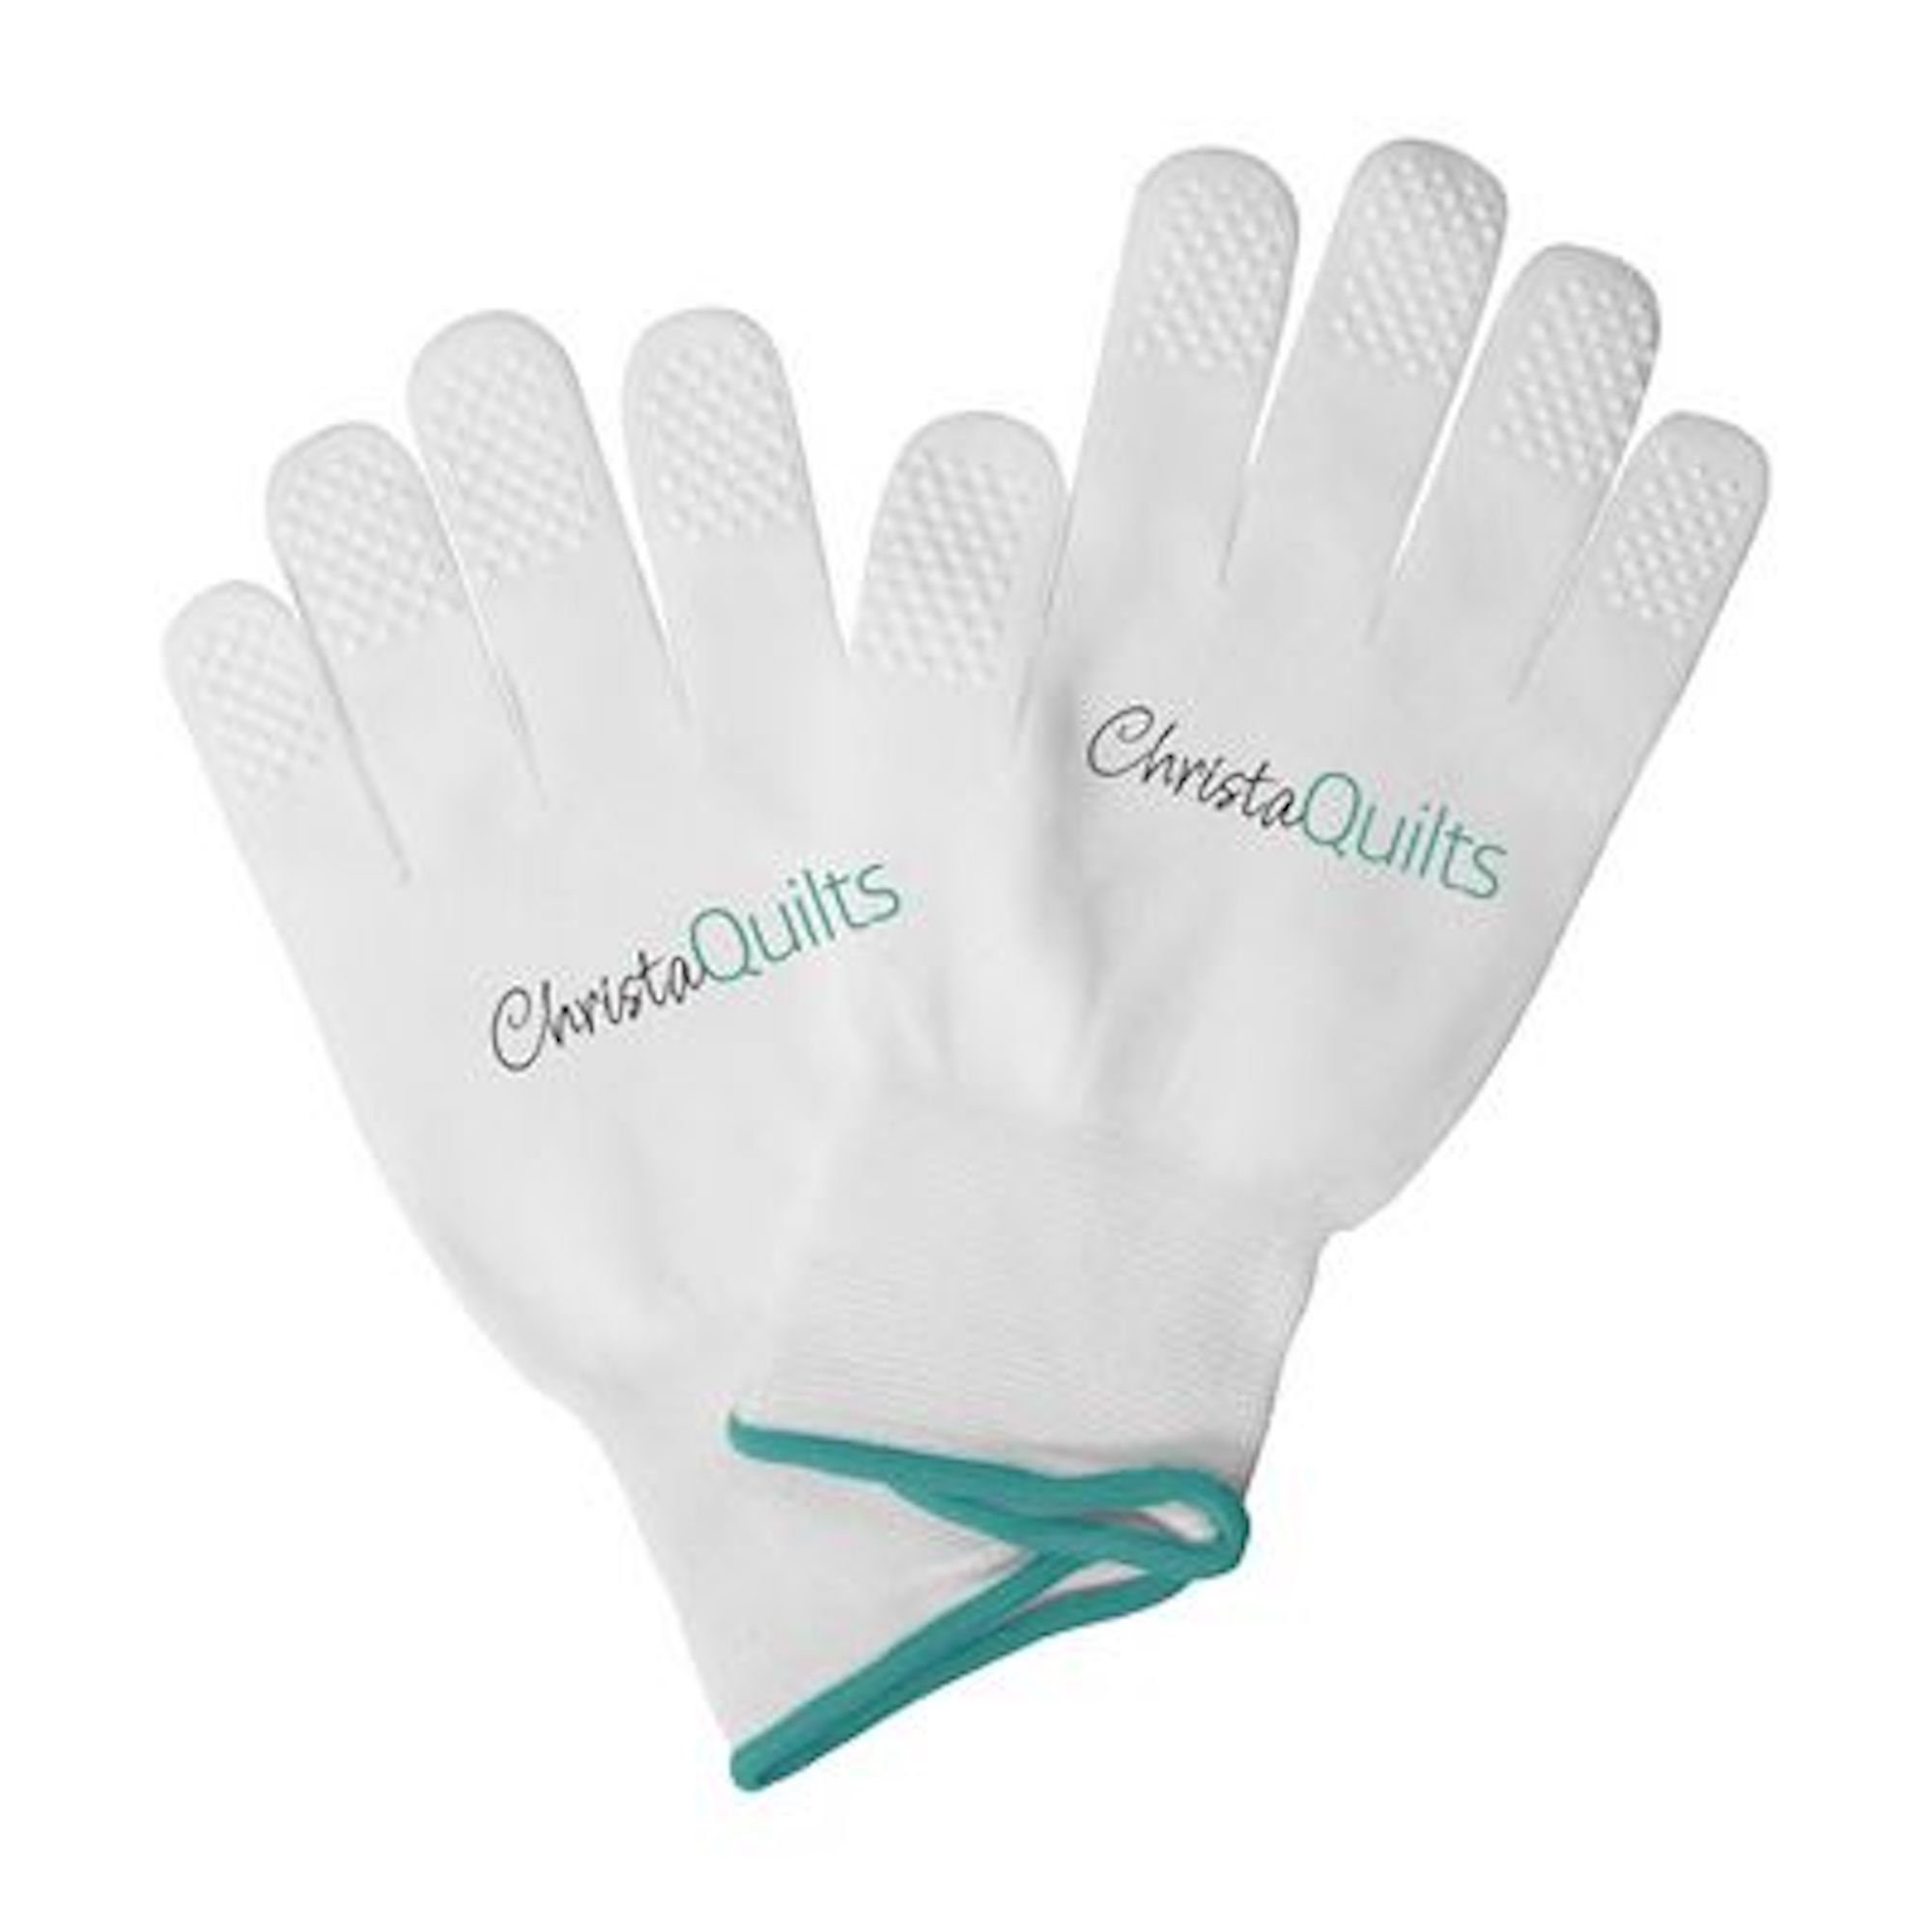  Sullivans 48668 Grip Gloves for Free Motion Quilting, Small  (Pack of 2), White